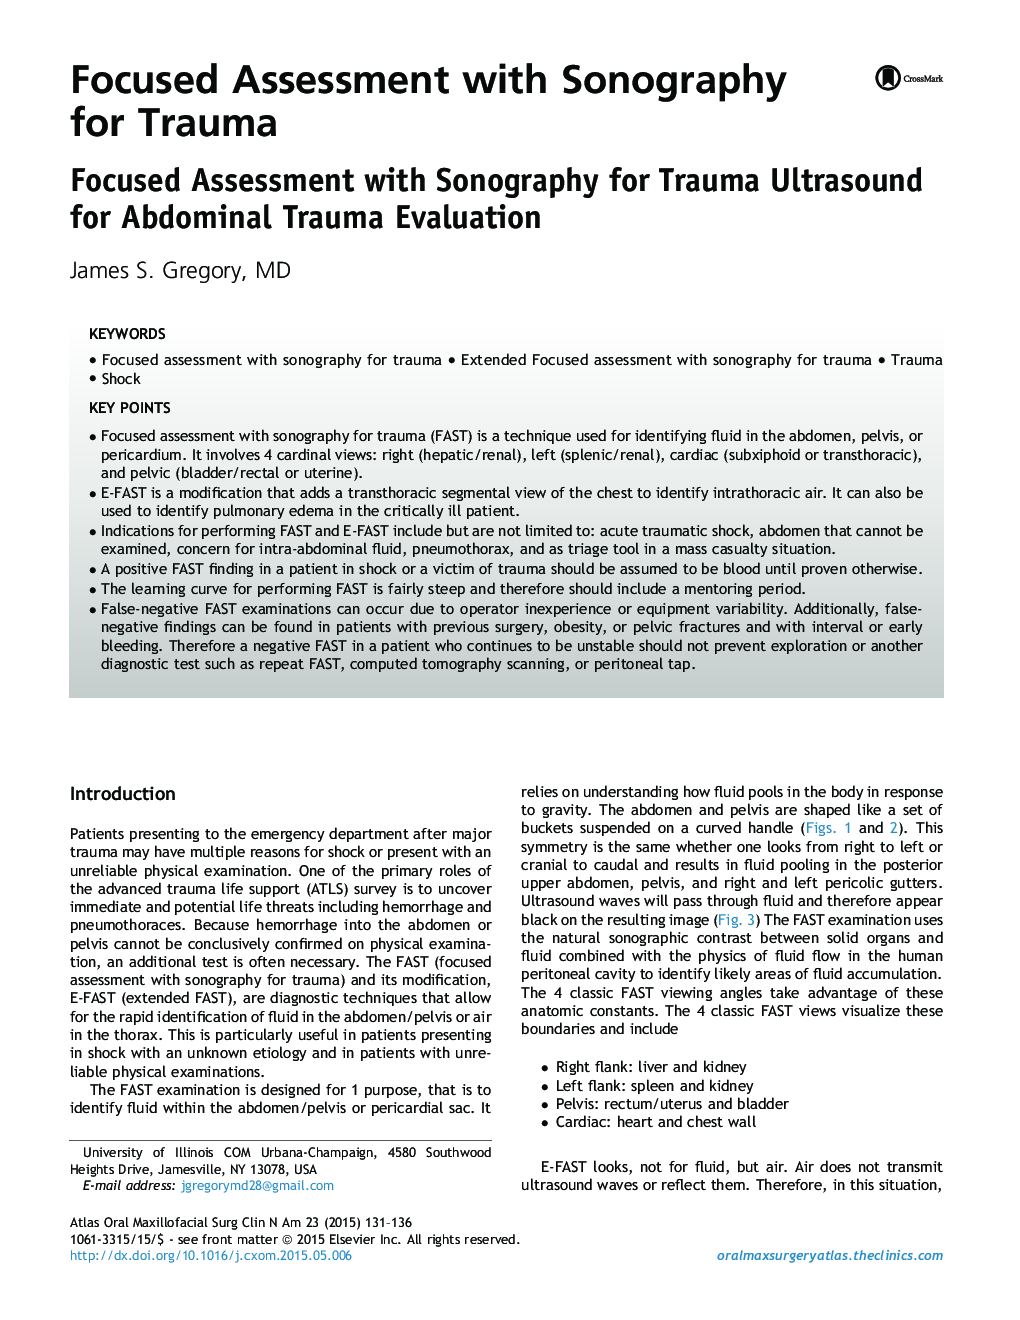 Focused Assessment with Sonography for Trauma